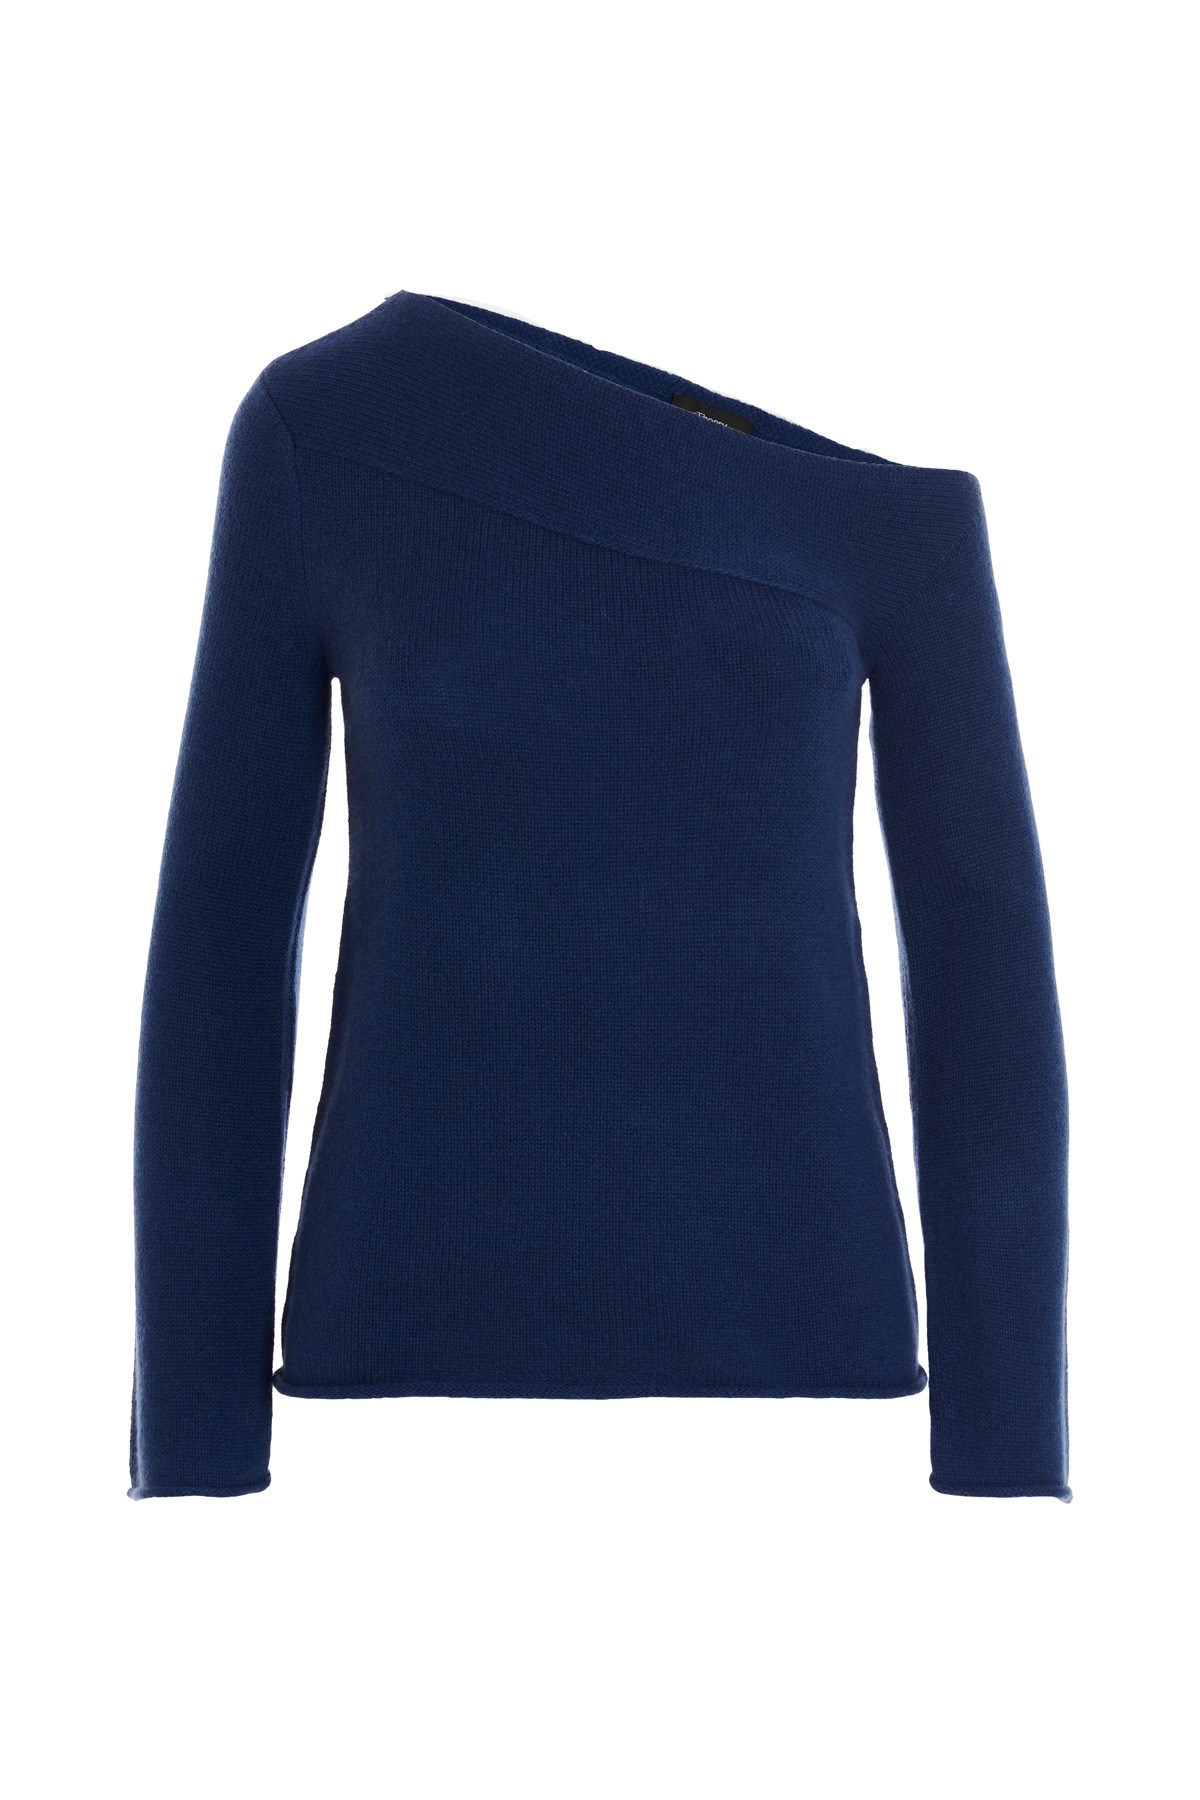 THEORY Asymmetric Cashmere Sweater